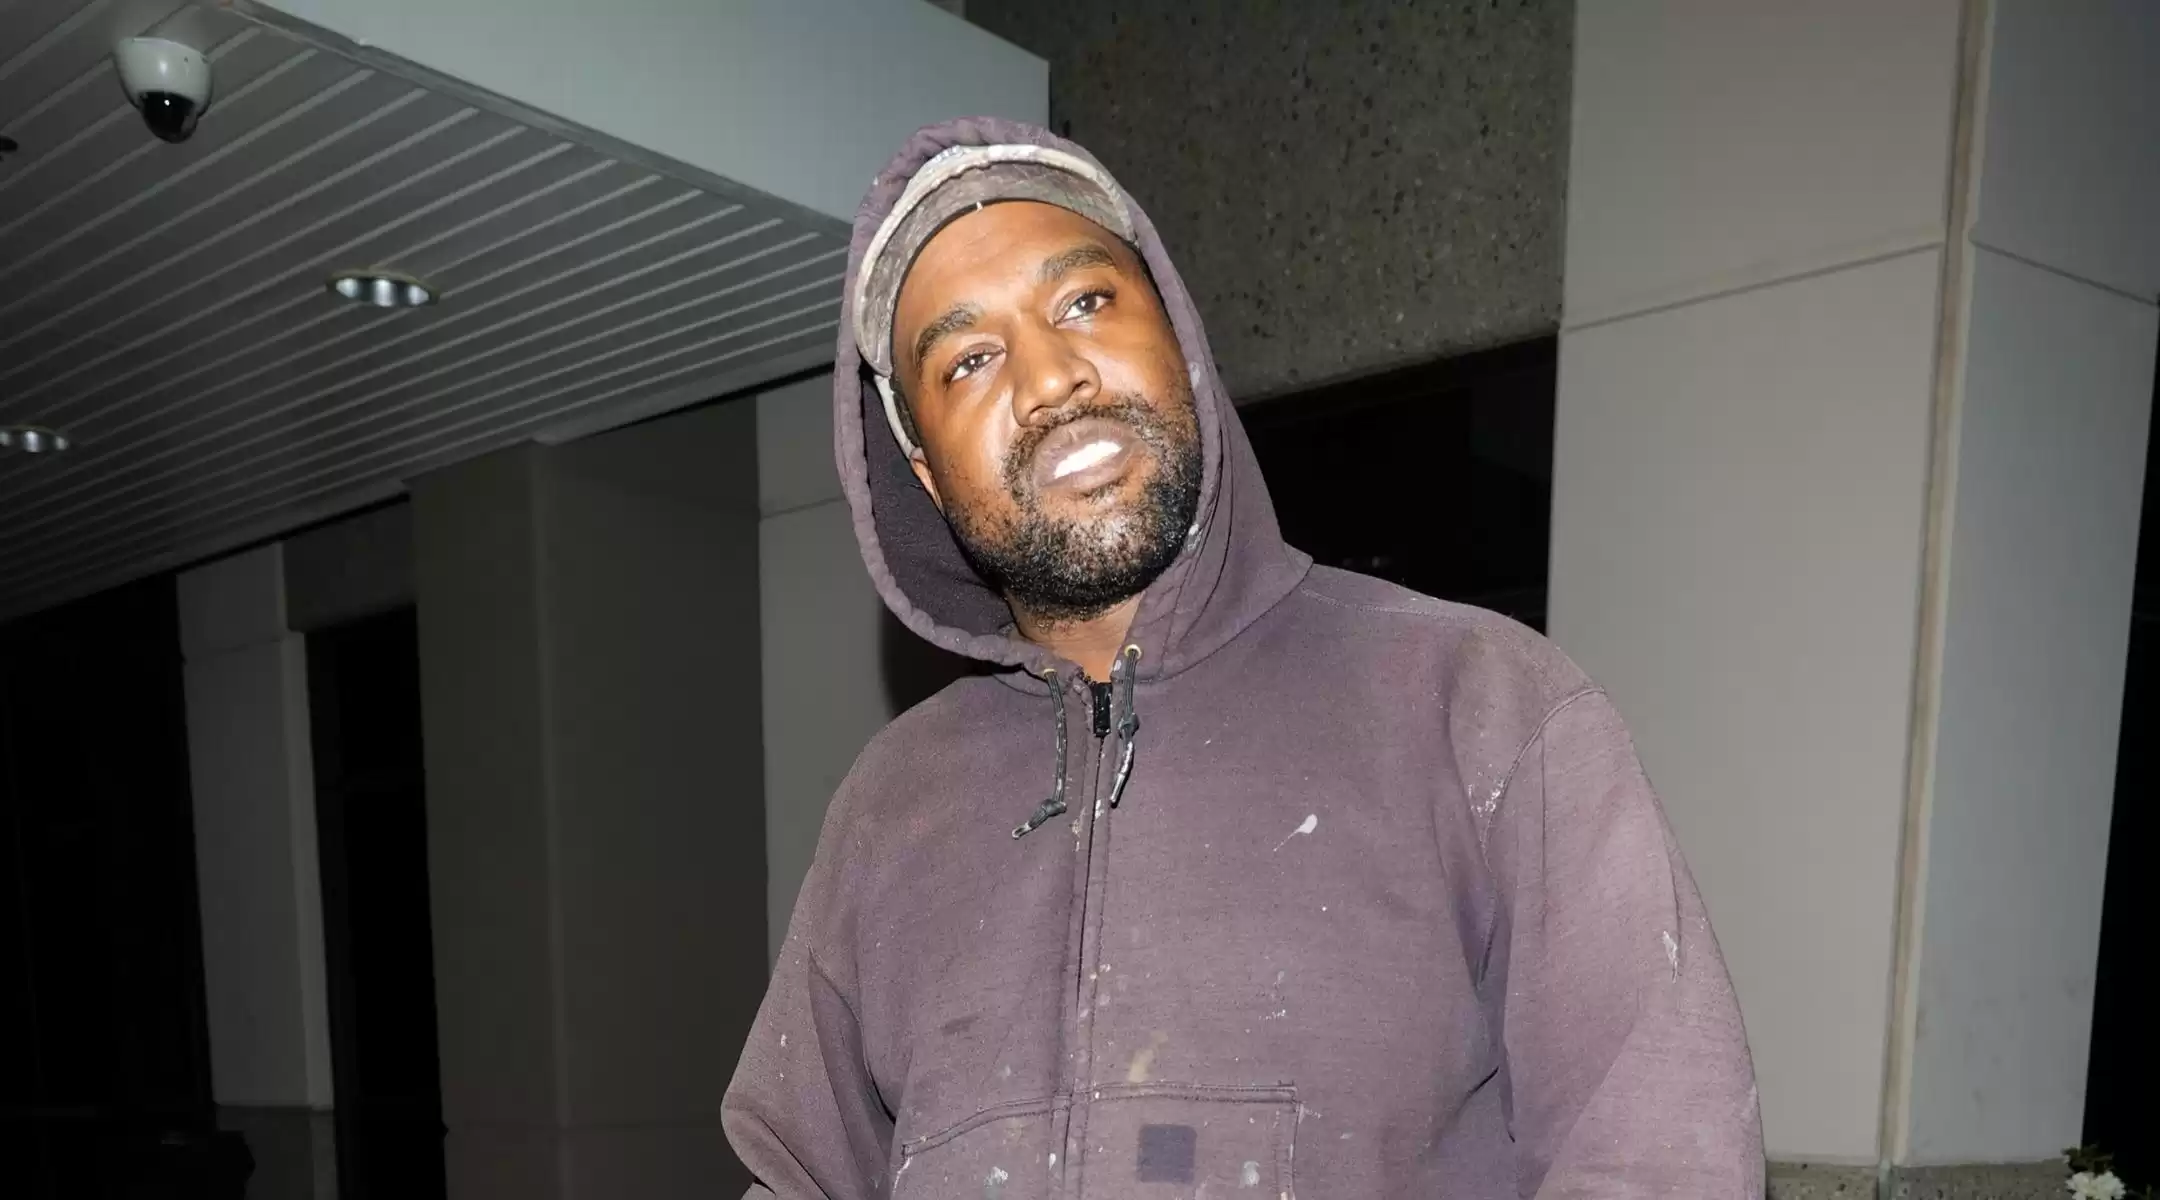 Kanye West Returns to Twitter/X, Vows Against Posting Antisemitic Content